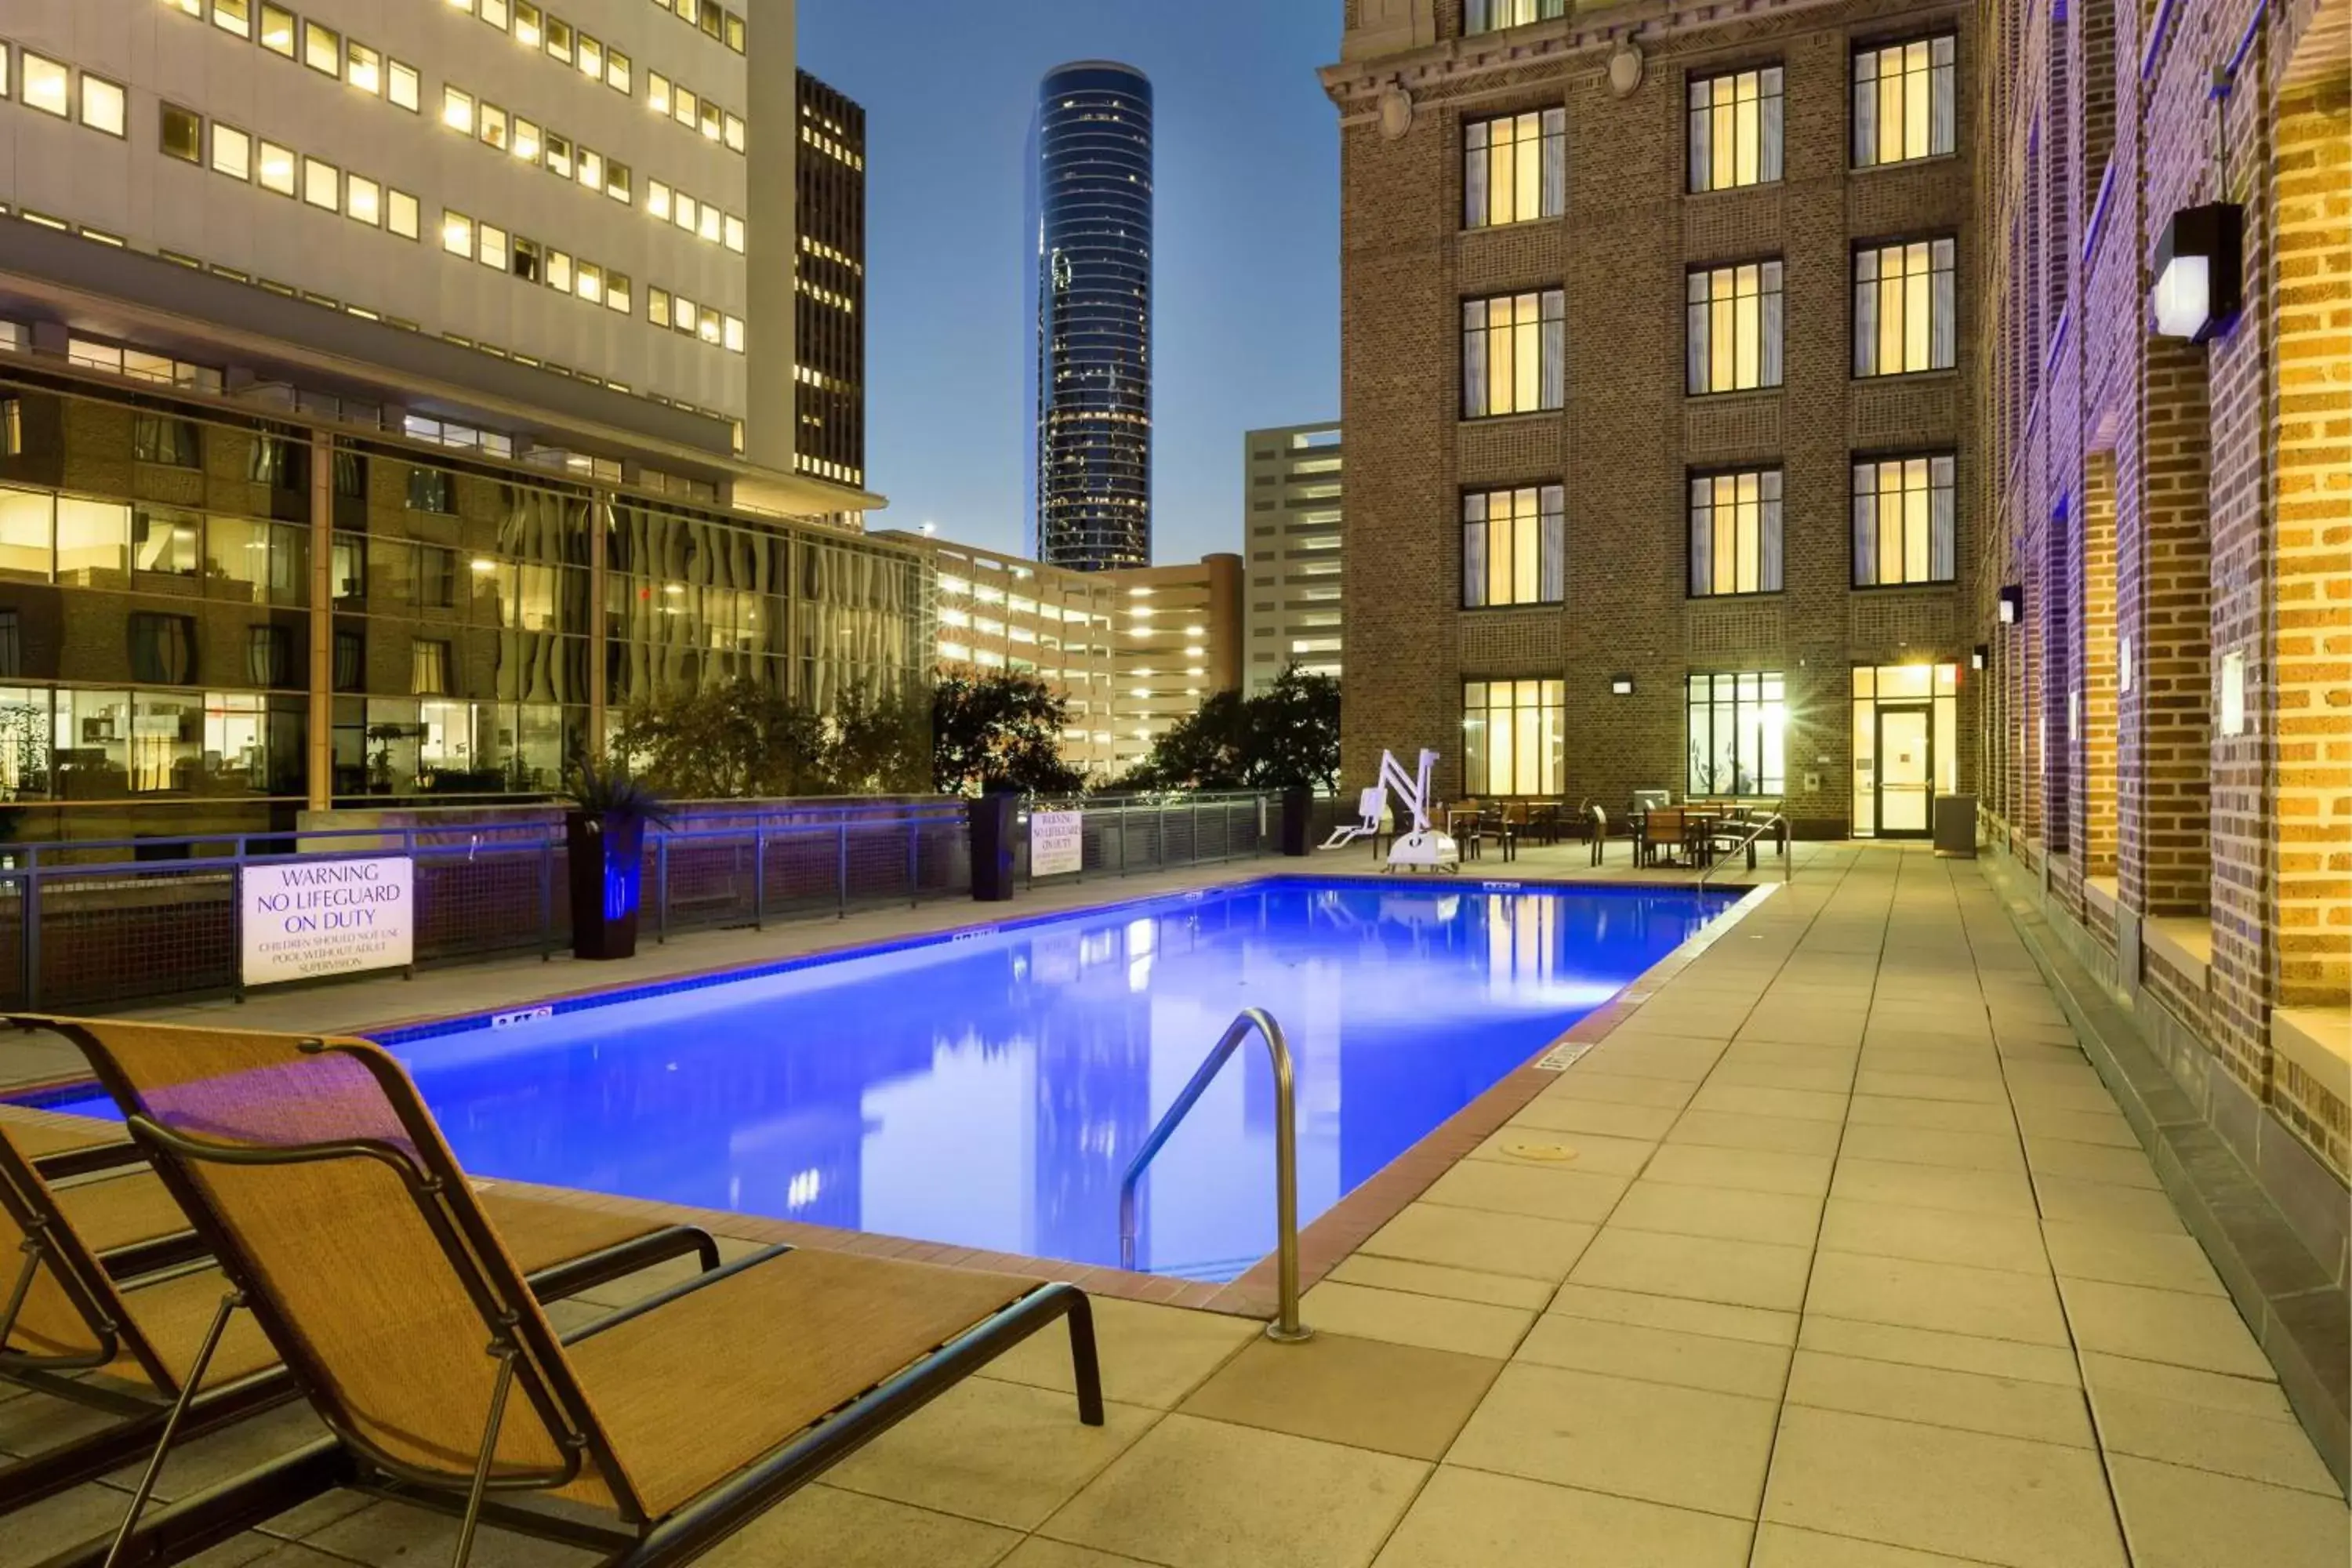 Swimming Pool in Residence Inn Houston Downtown/Convention Center